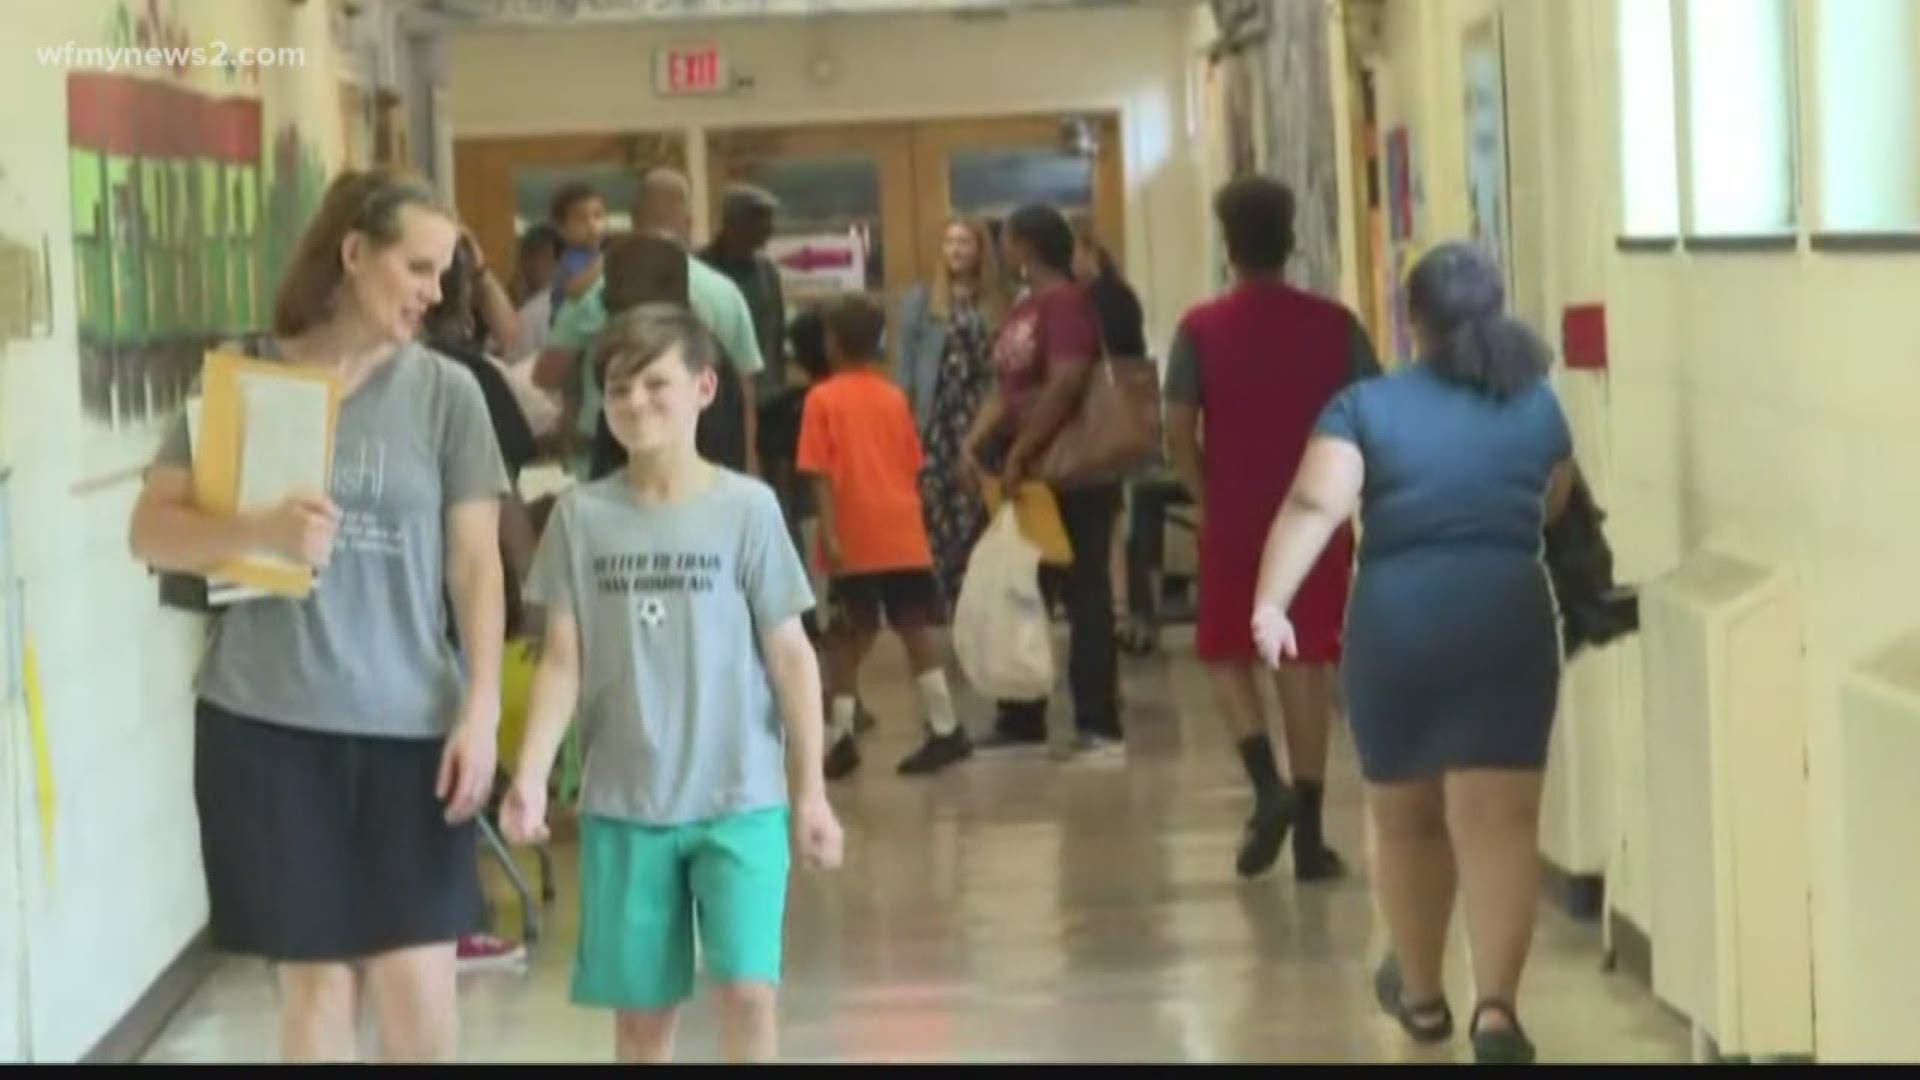 Brook Global Studies students were supposed to start two weeks ago until school leaders found serious repairs were needed. Now, they're letting parents have a look around days before the first day of school.